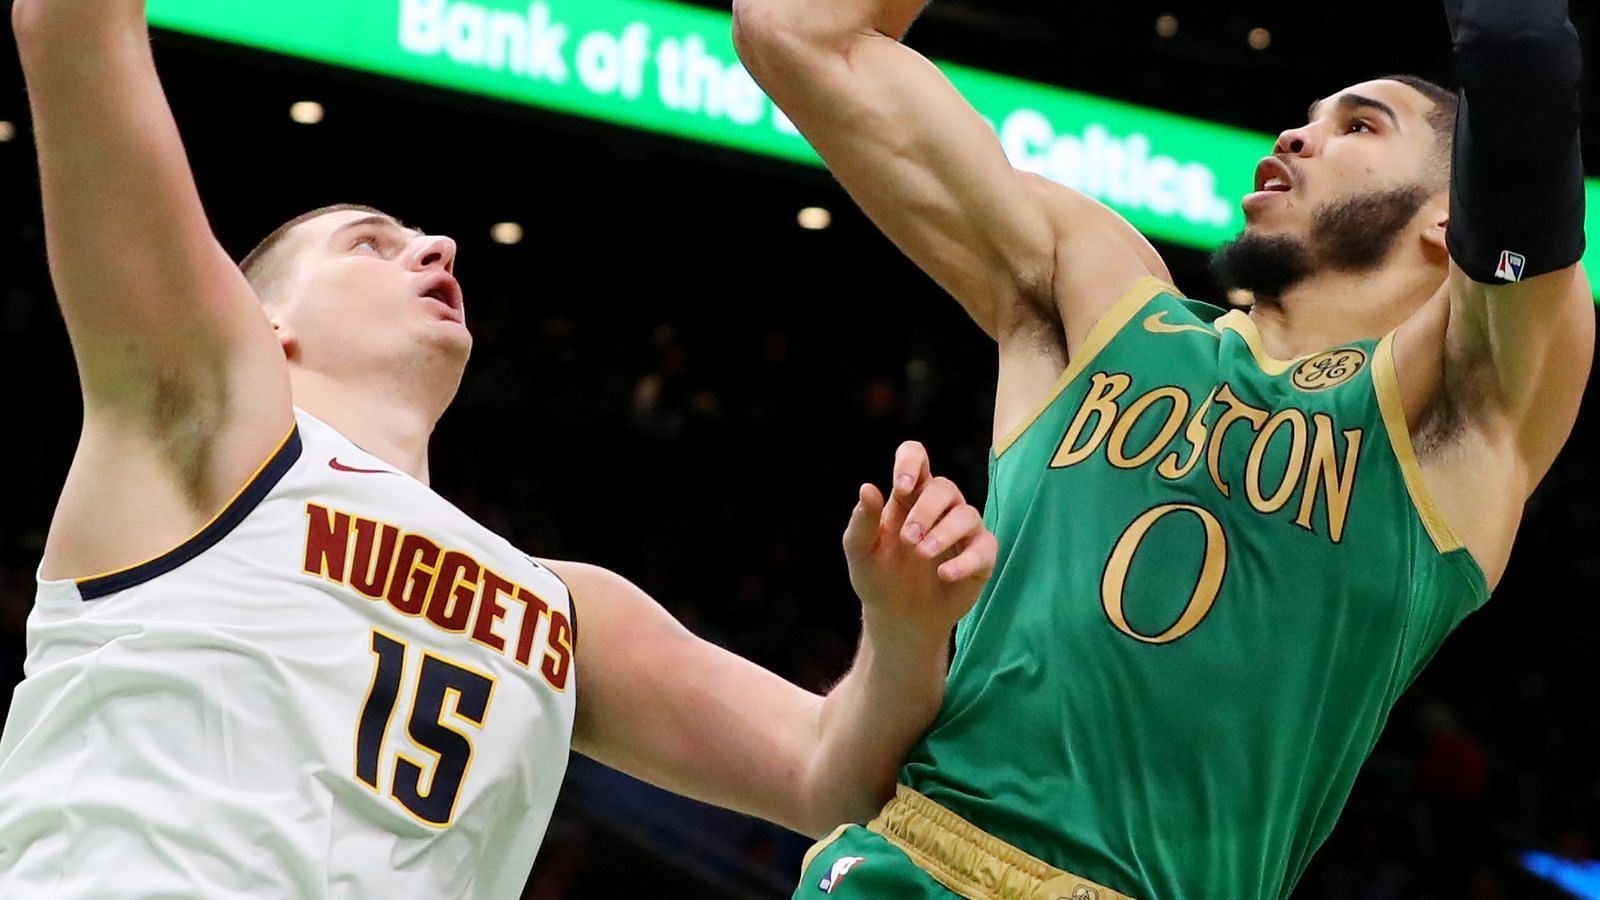 Ball Arena, the Denver Nuggets&#039; home court, rung with MVP chants for Jayson Tatum over Nikola Jokic.[Photo: Sky Sports]